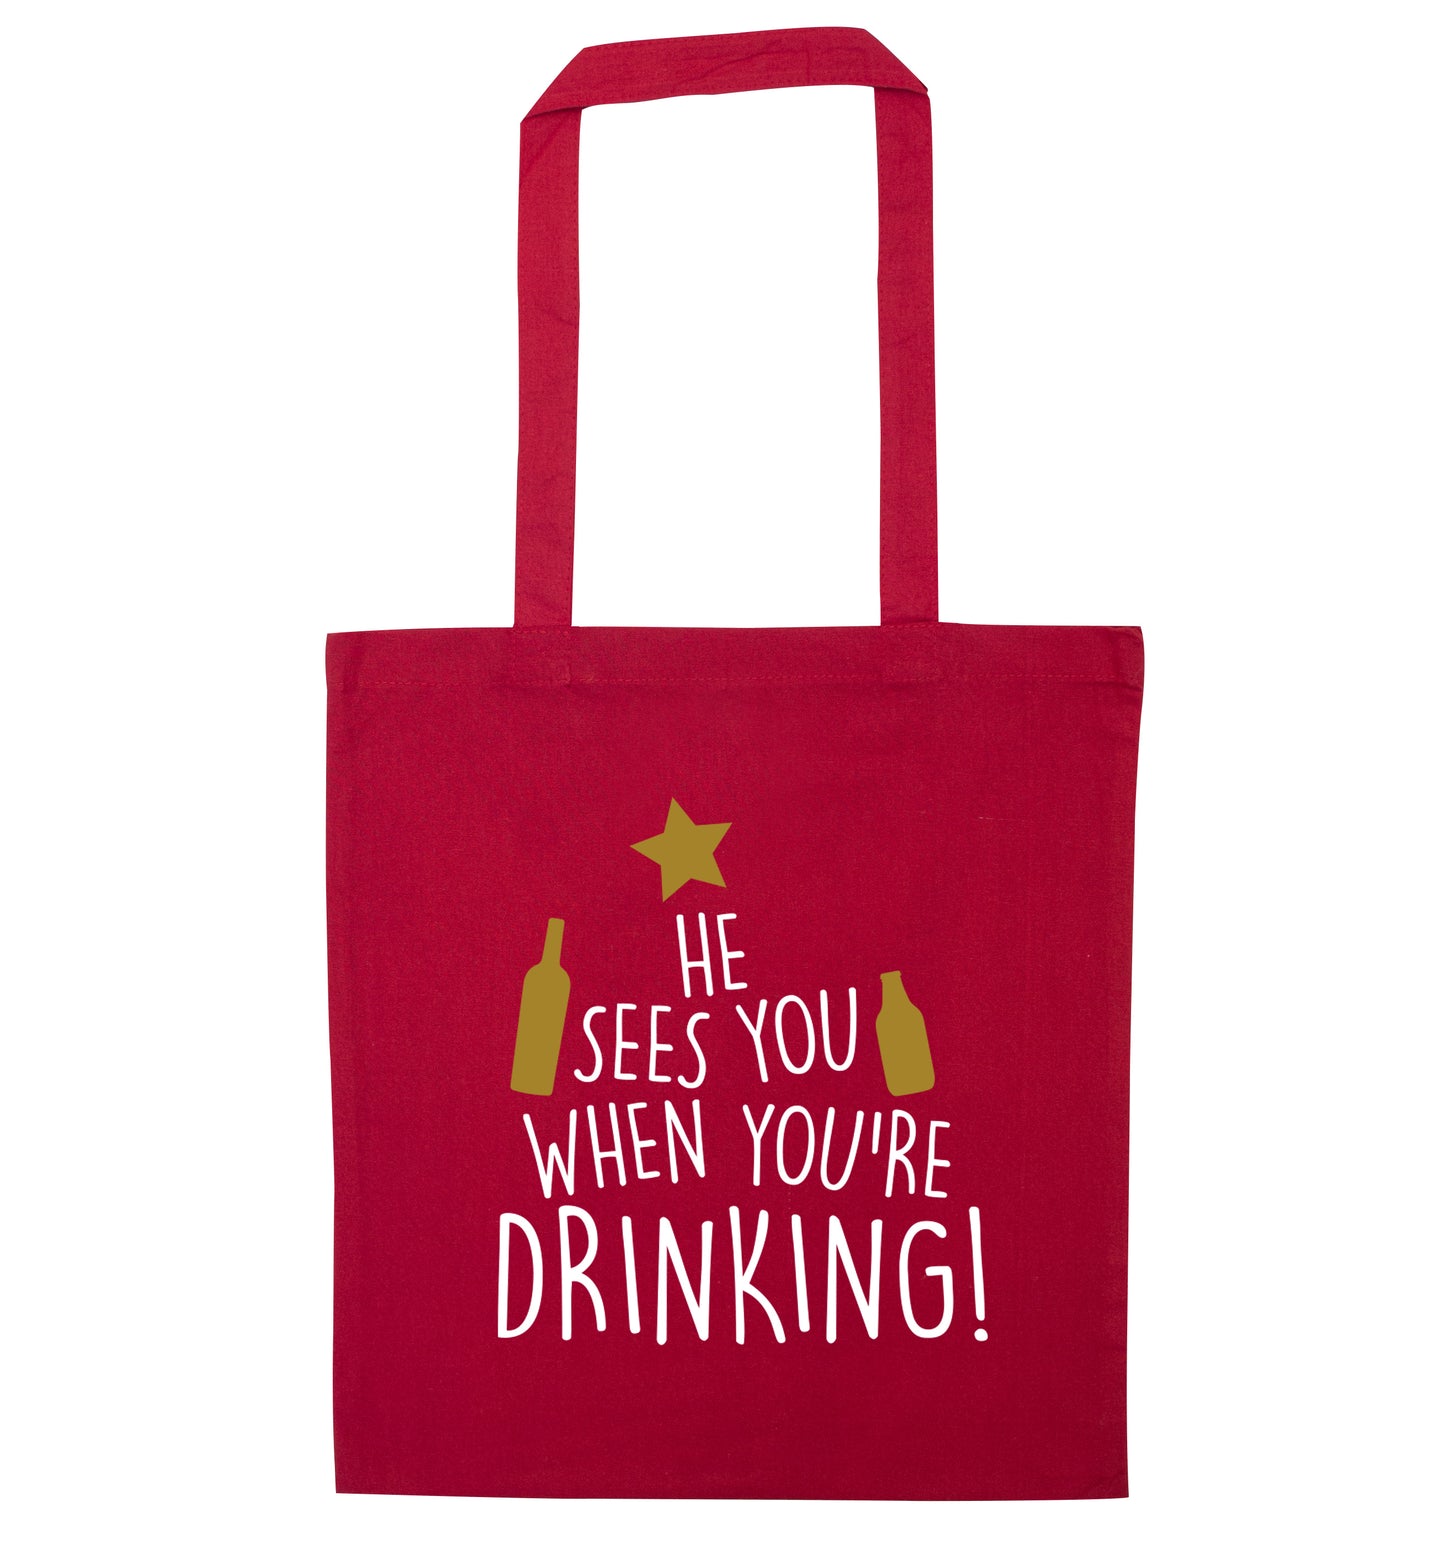 He sees you when you're drinking red tote bag